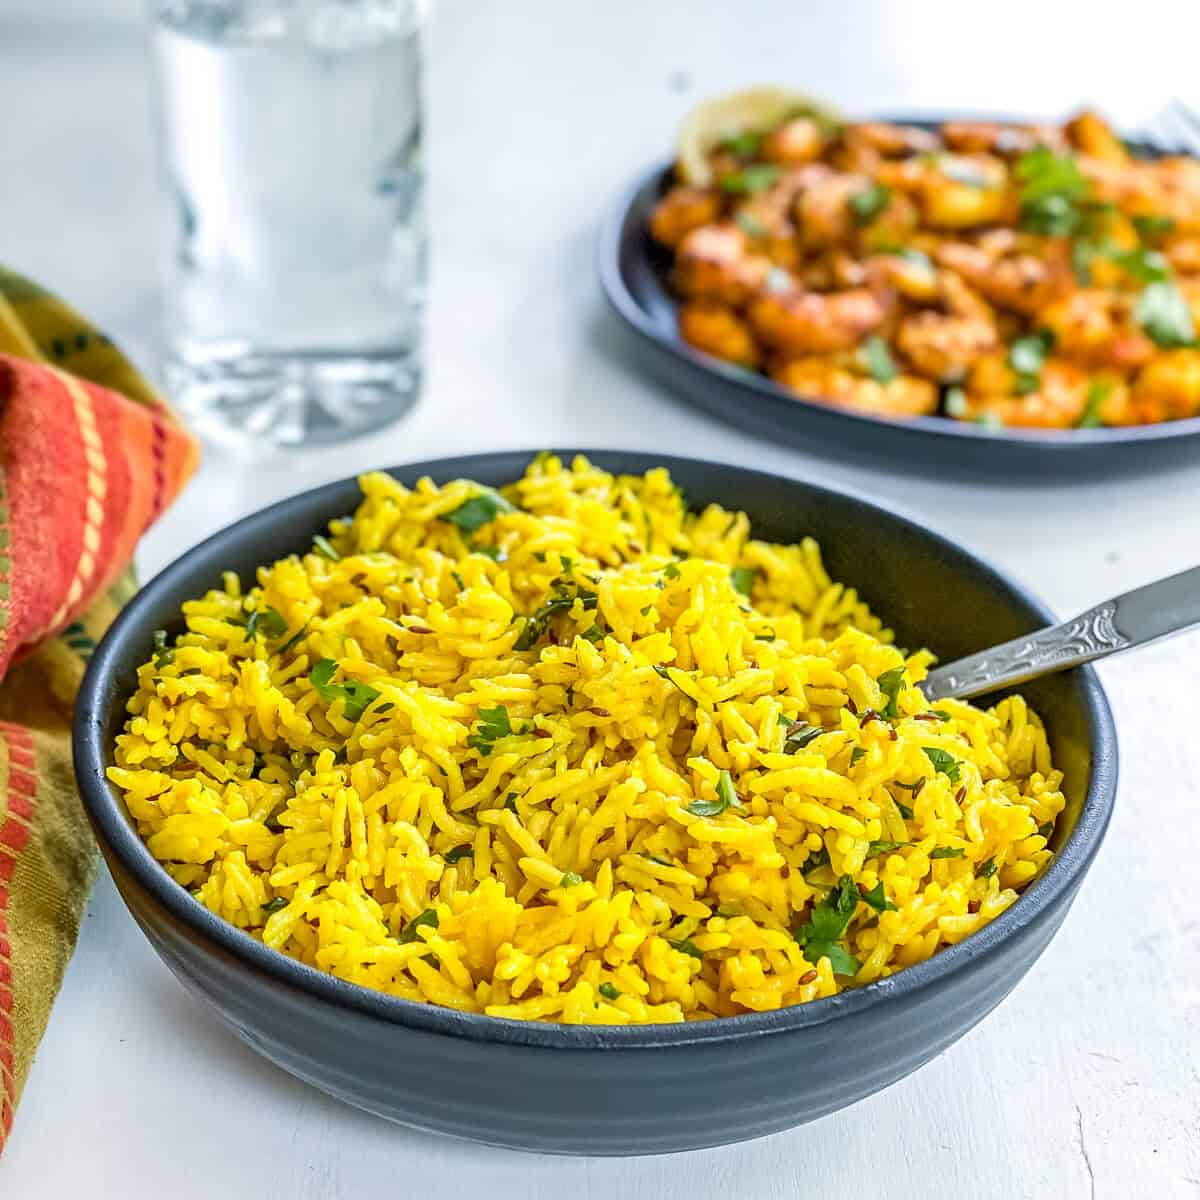 Step-by-Step Guide to Making Perfect Yellow Rice Every Time